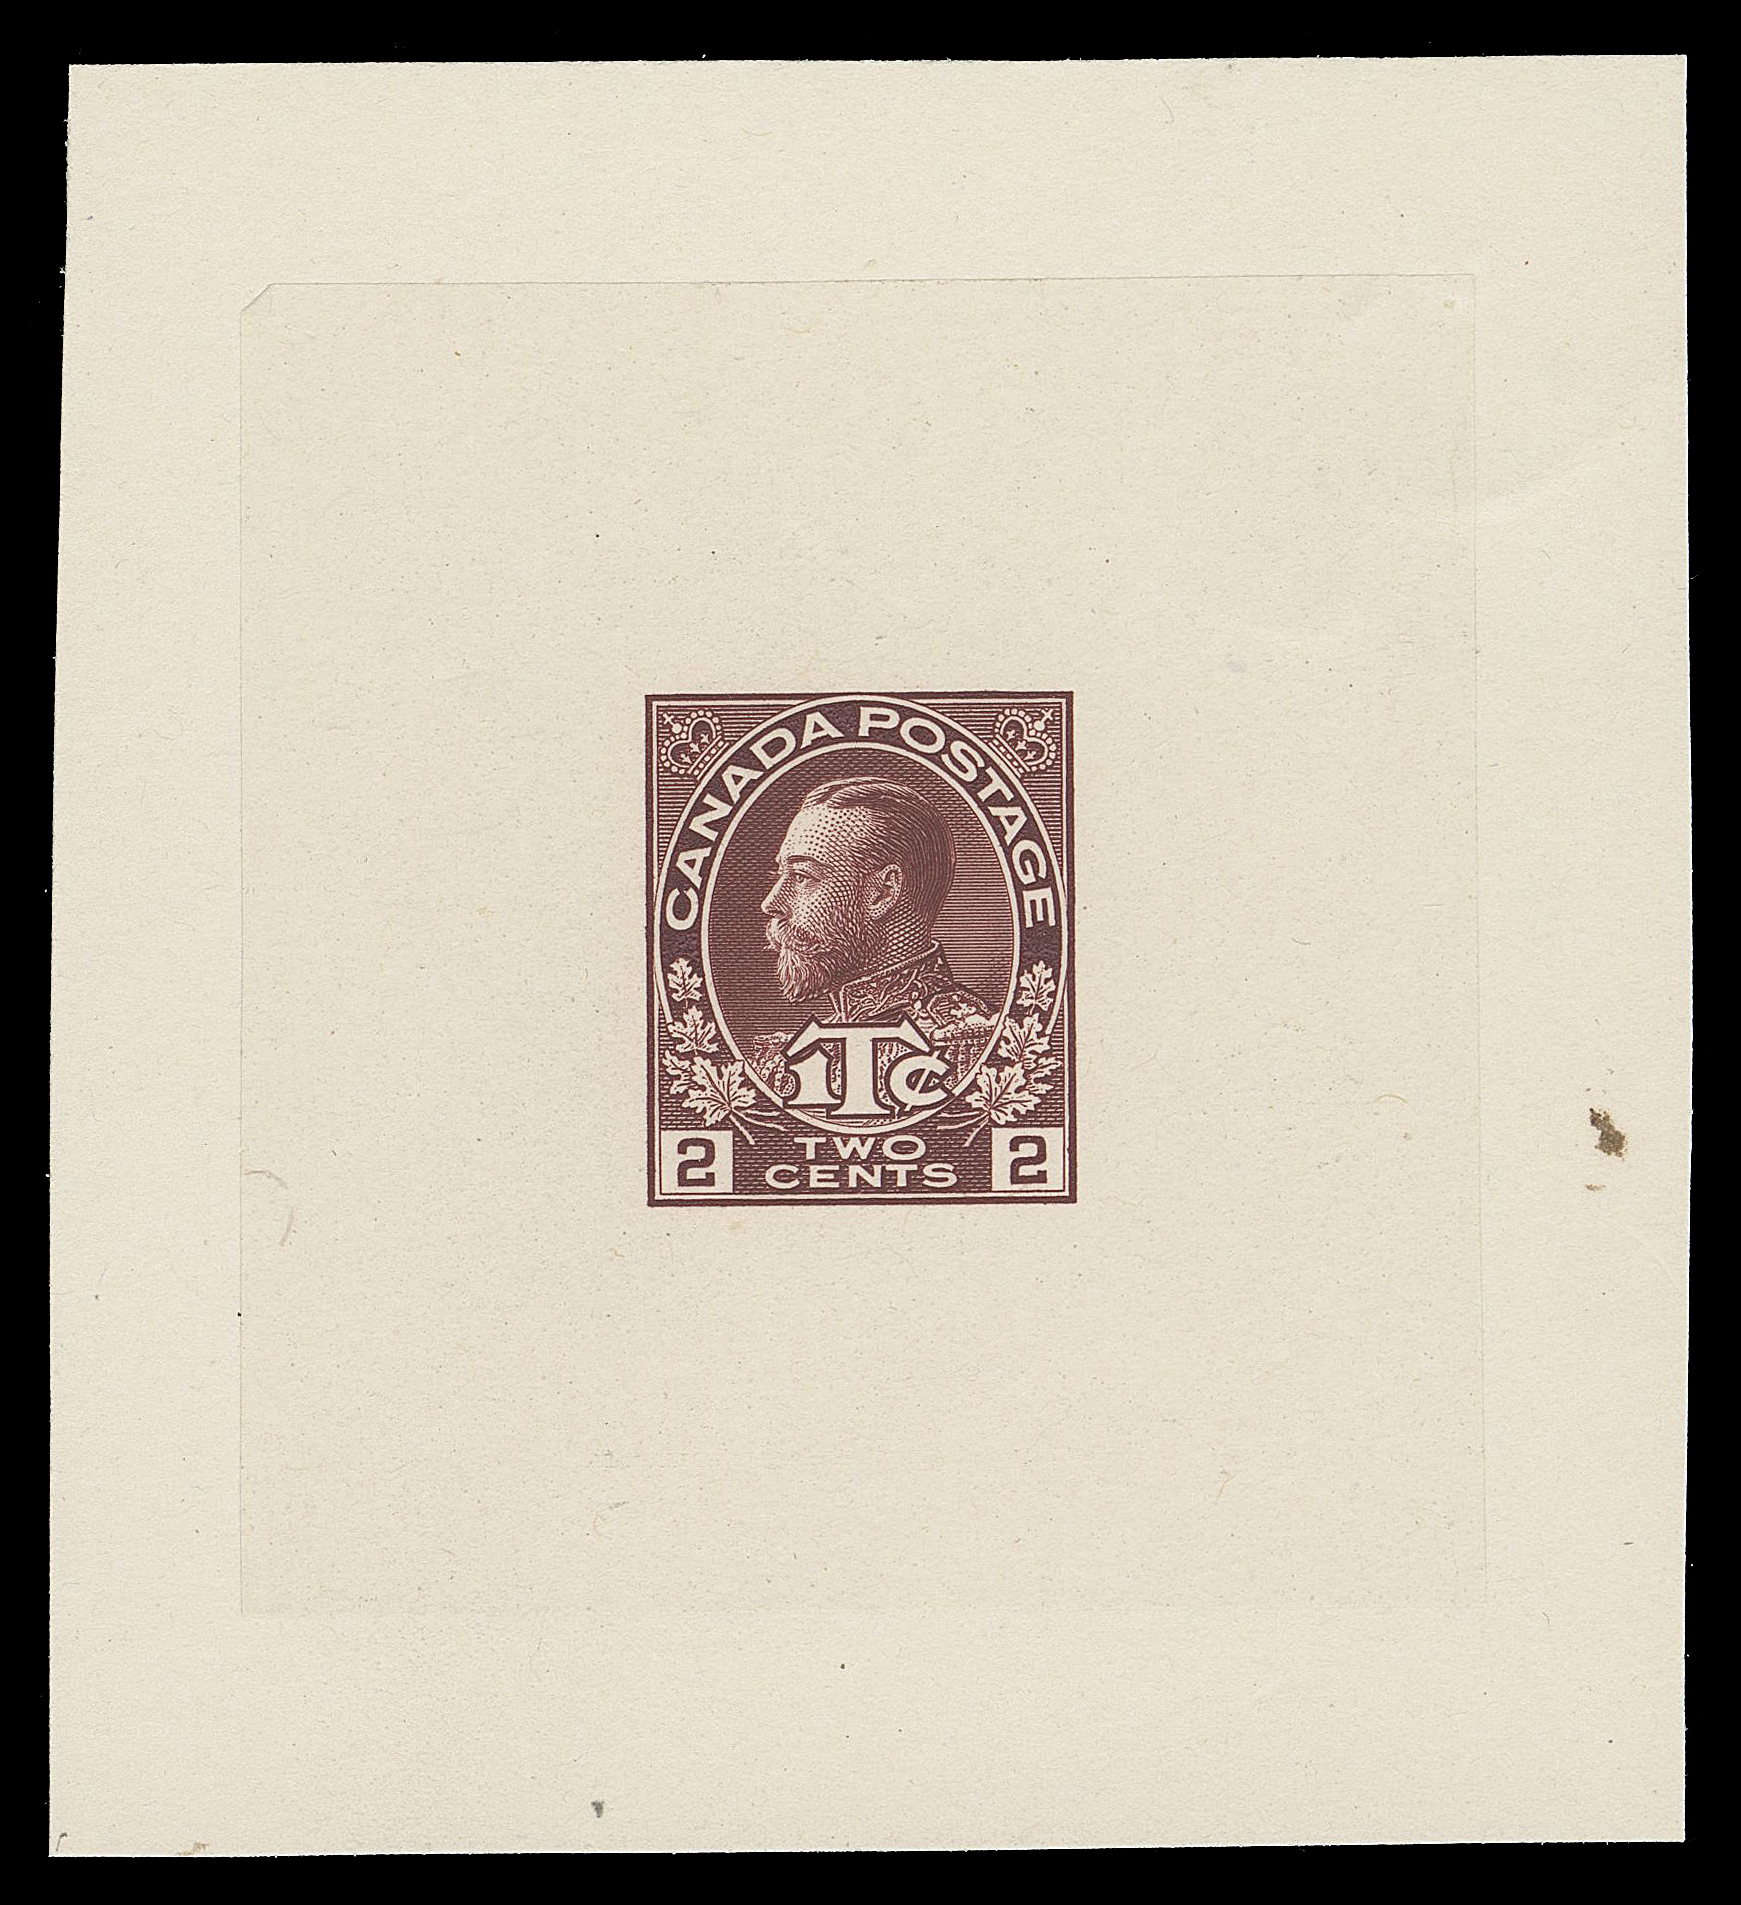 ADMIRAL PROOFS  MR3a,Die Proof printed on india paper 52 x 56mm, die sunk on slightly larger card 70 x 76mm; small stain near edge of card at right; unusual albino impression of die number "OG-106½" and American Bank Note Company Ottawa imprint (23.5mm long) below design. A rare die proof, VF (Minuse & Pratt MR4TC1a listing with normal carmine shade)